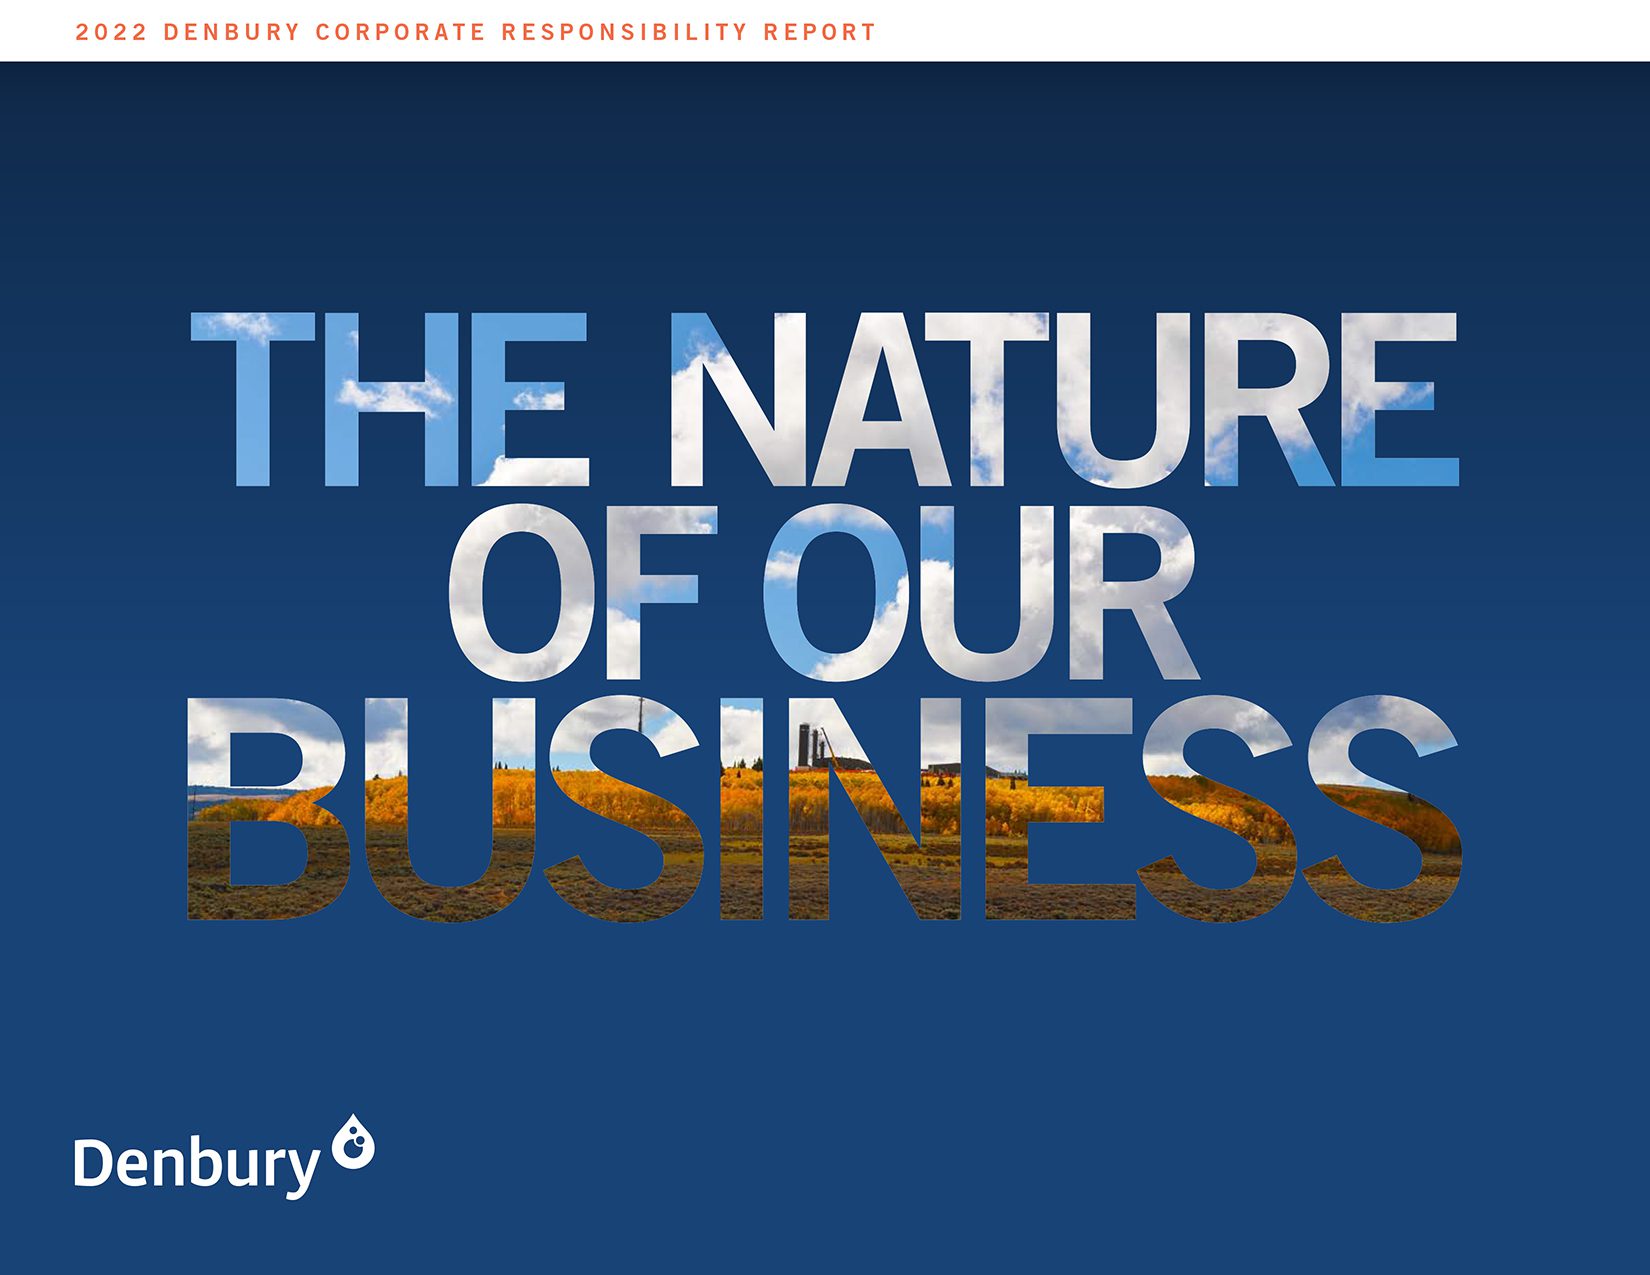 For more information about Denbury’s sustainability governance practices see our 2022 Corporate Responsibility Report.